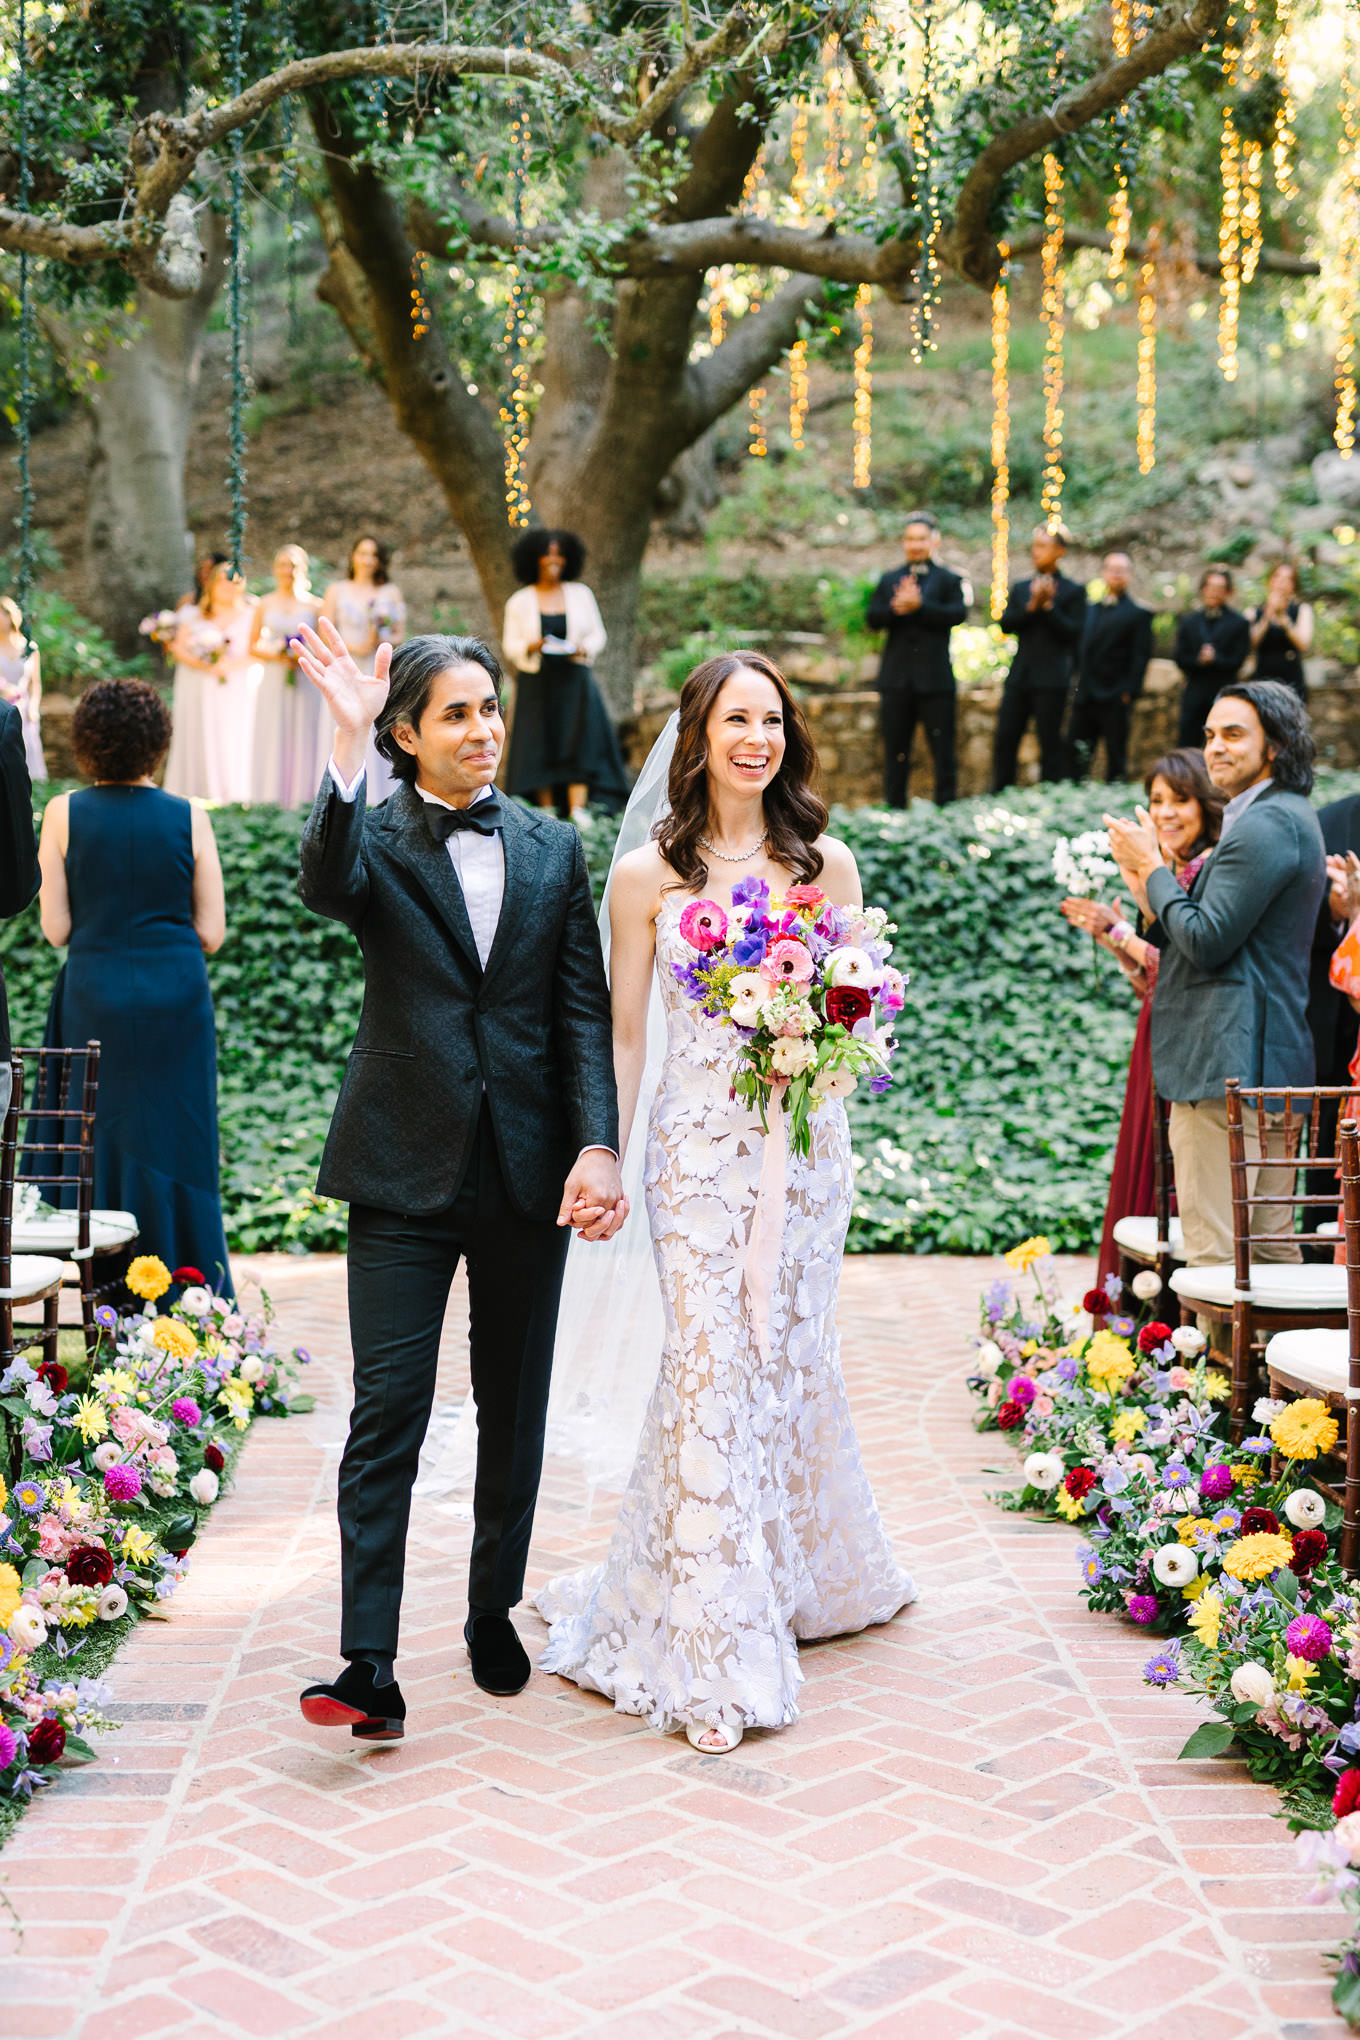 Calamigos Ranch Malibu wedding | Wedding and elopement photography roundup | Los Angeles and Palm Springs photographer | #losangeleswedding #palmspringswedding #elopementphotographer Source: Mary Costa Photography | Los Angeles